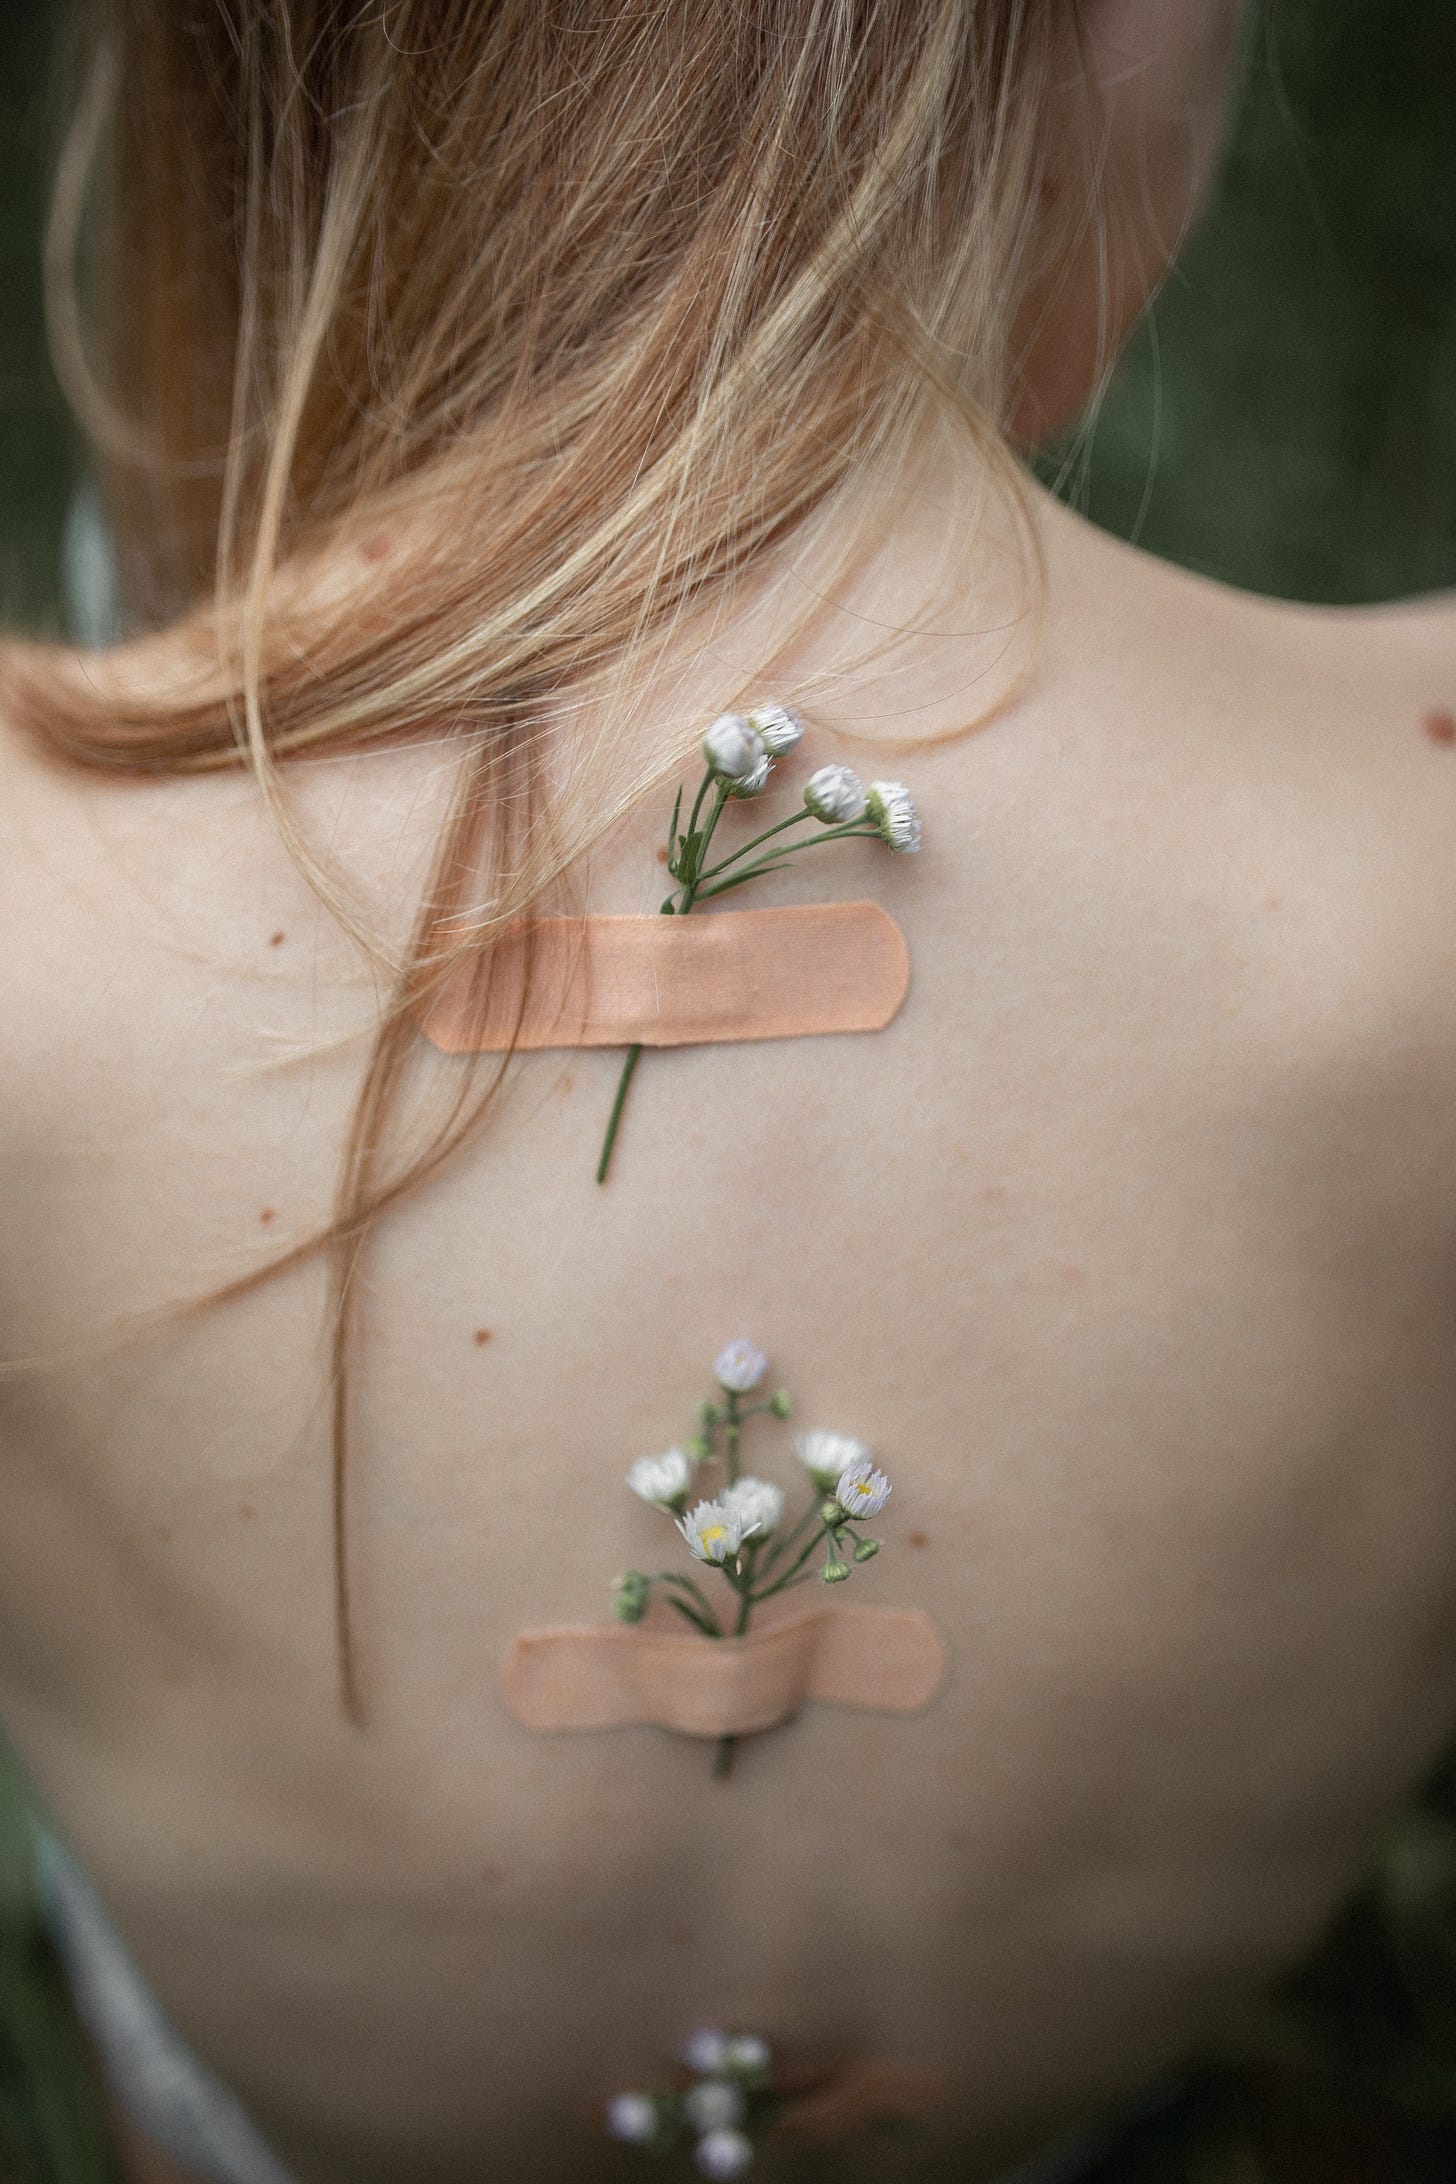 bare backed woman with long hair and three bandaids down her spine. Each bandaid has a sprig of flowers underneath.